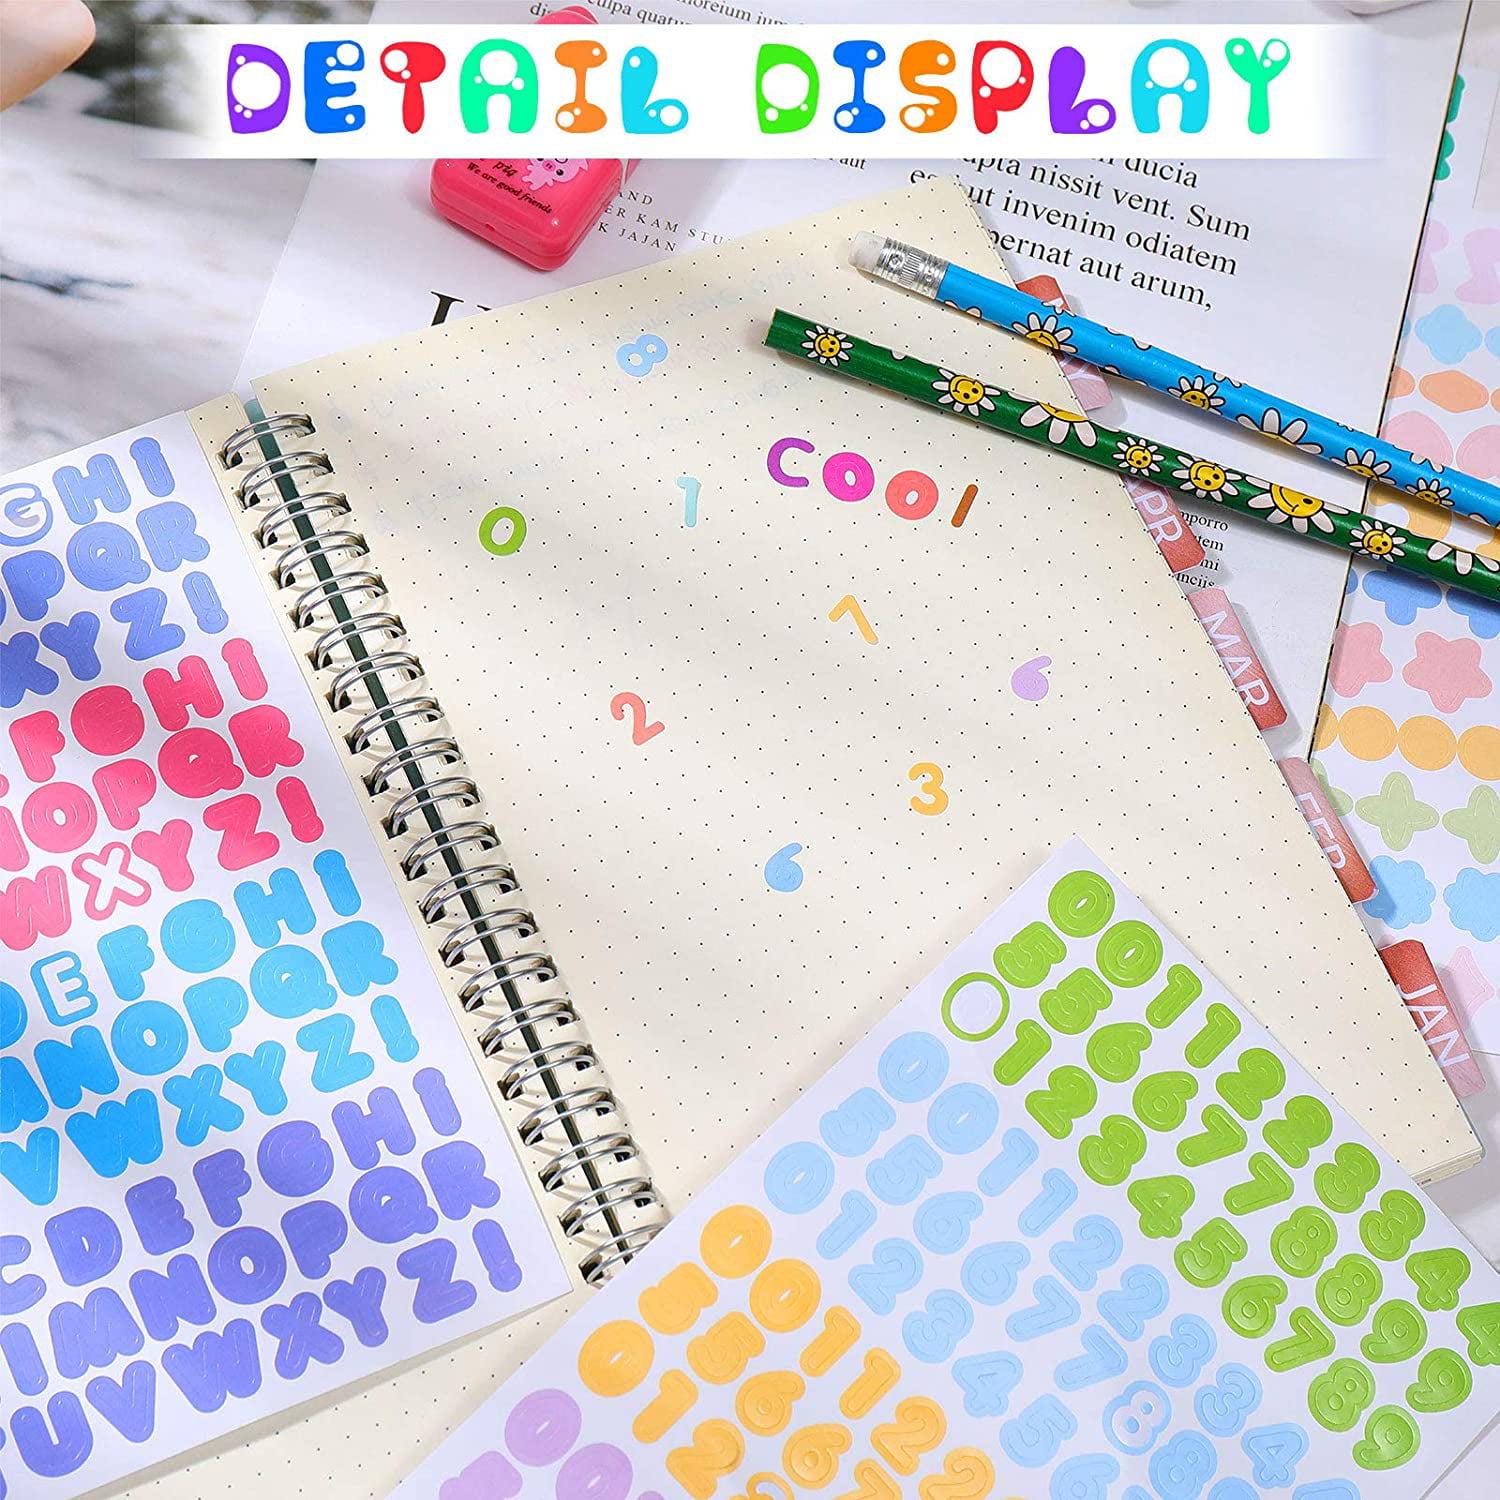 20 Sheets Colorful Number Letter Stickers Alphabet Number Star Heart Stickers Assorted Self Adhesive DIY Stickers for Arts Crafts Cards Scrapbook Home Decoration Supplies 